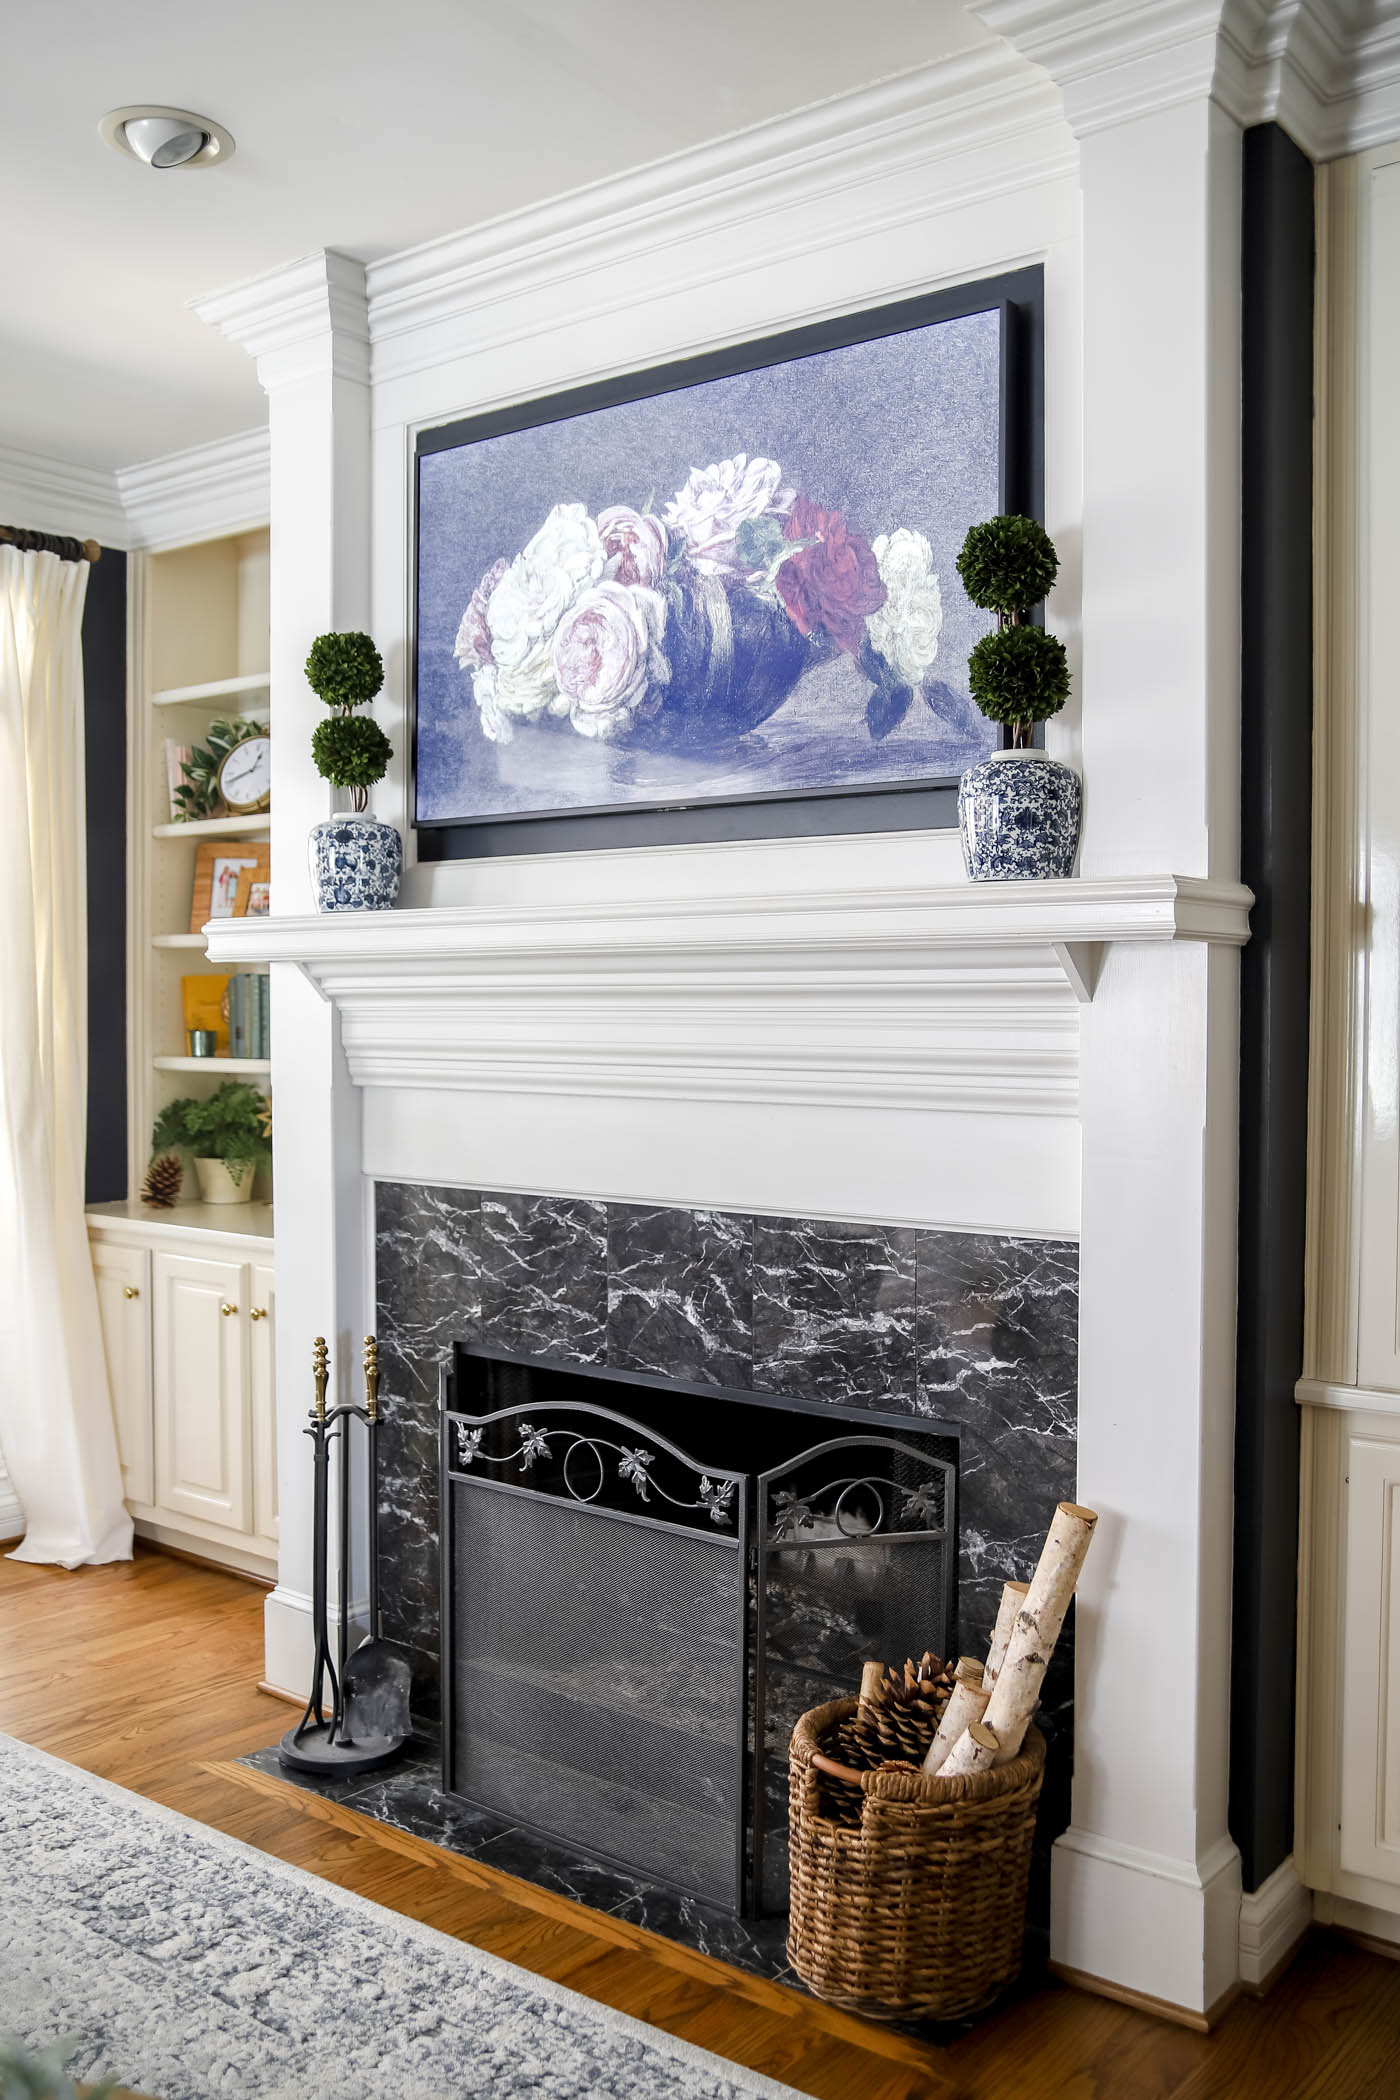 Can You Hang a TV Over a Fireplace? Here Are 5 Things to Consider